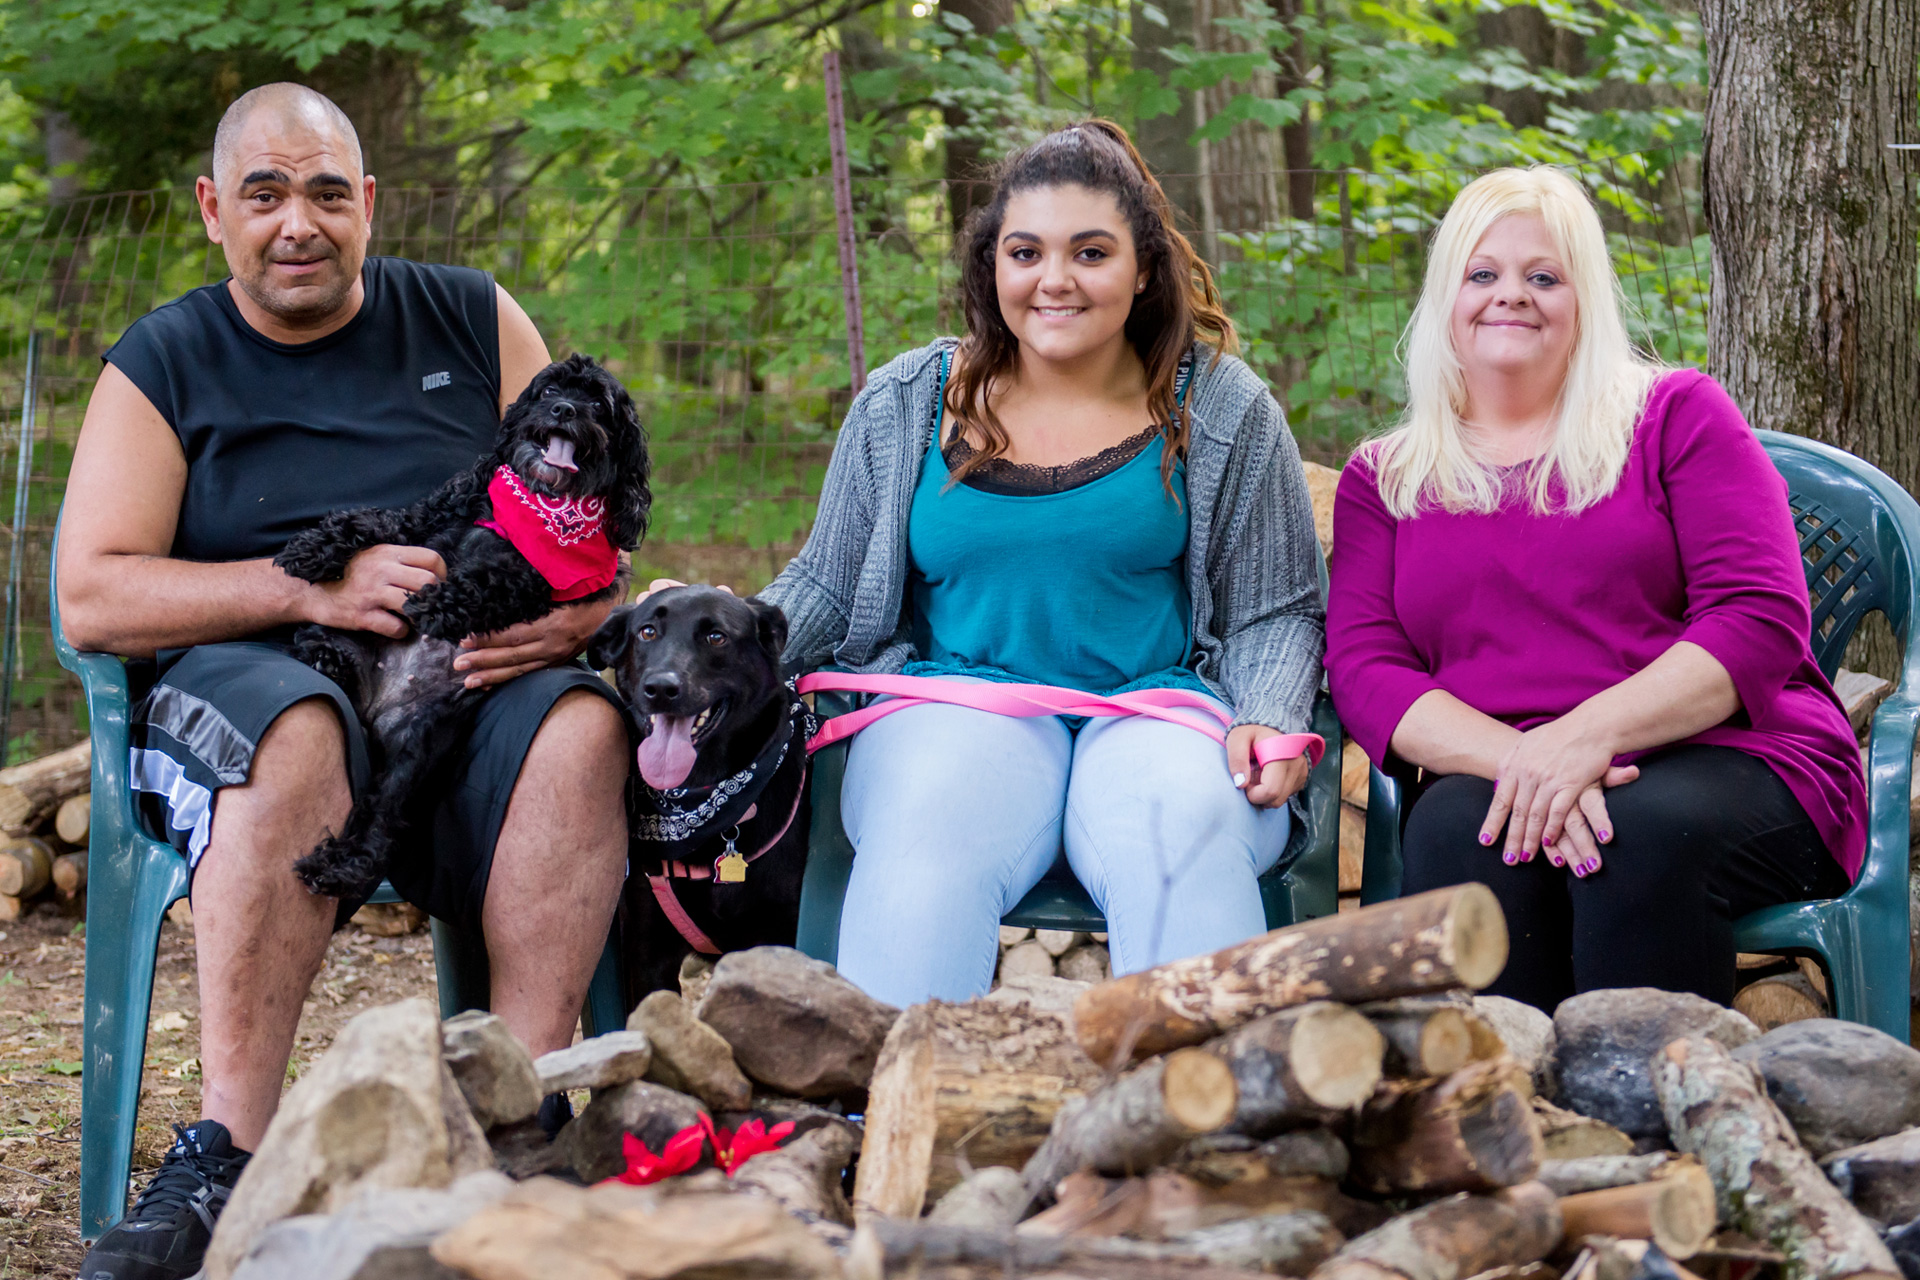 A dad, mom, daughter, and two dogs sit outdoors by the wood pile